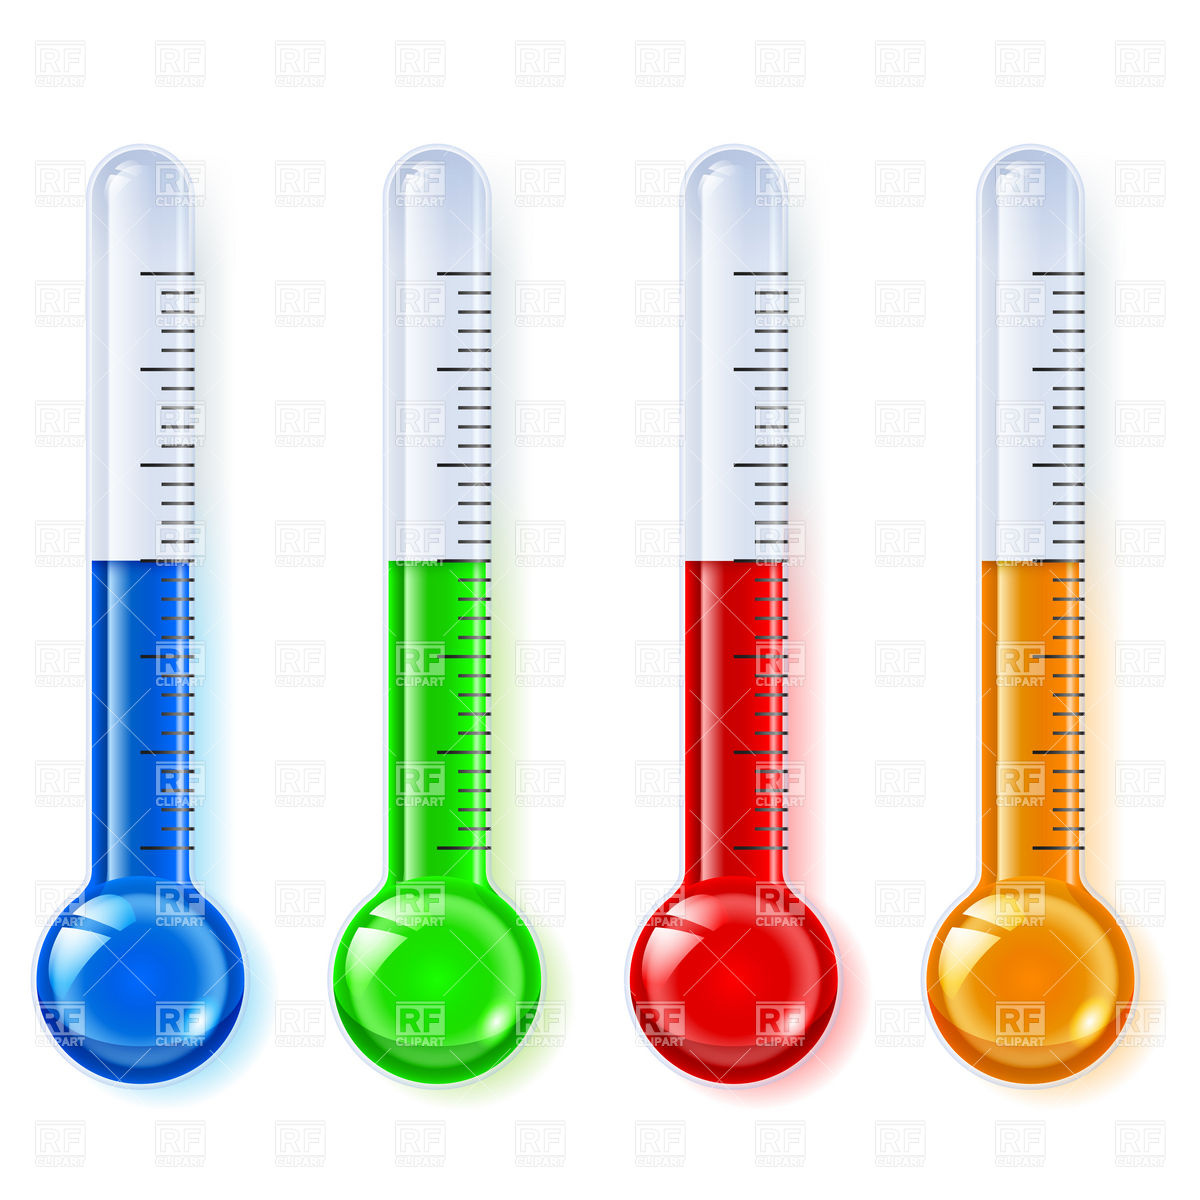 Temperature Indicators Thermometer Download Royalty Free Vector